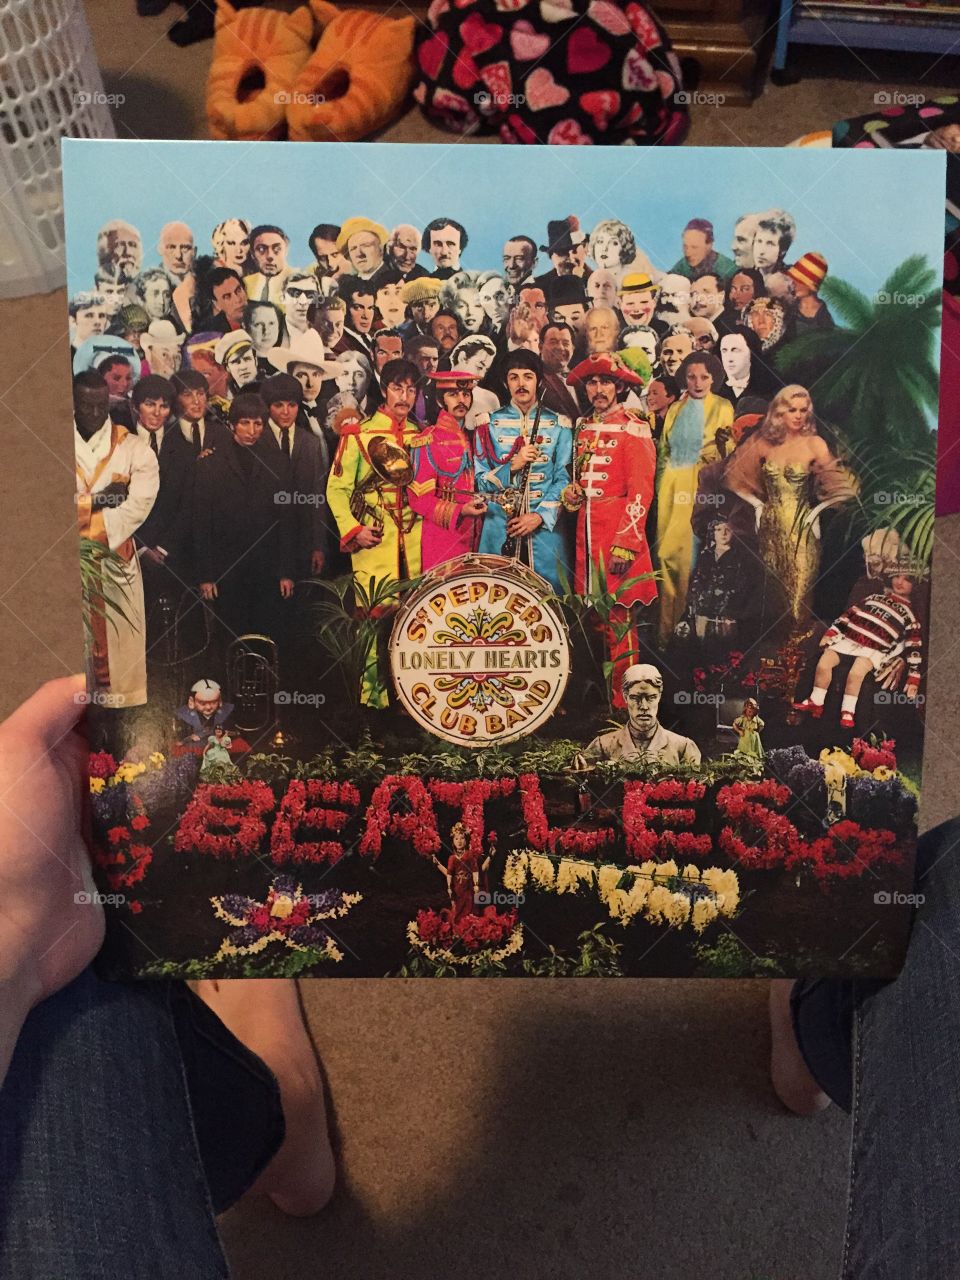 Sargent Pepper's Lonely Hearts Club Band.